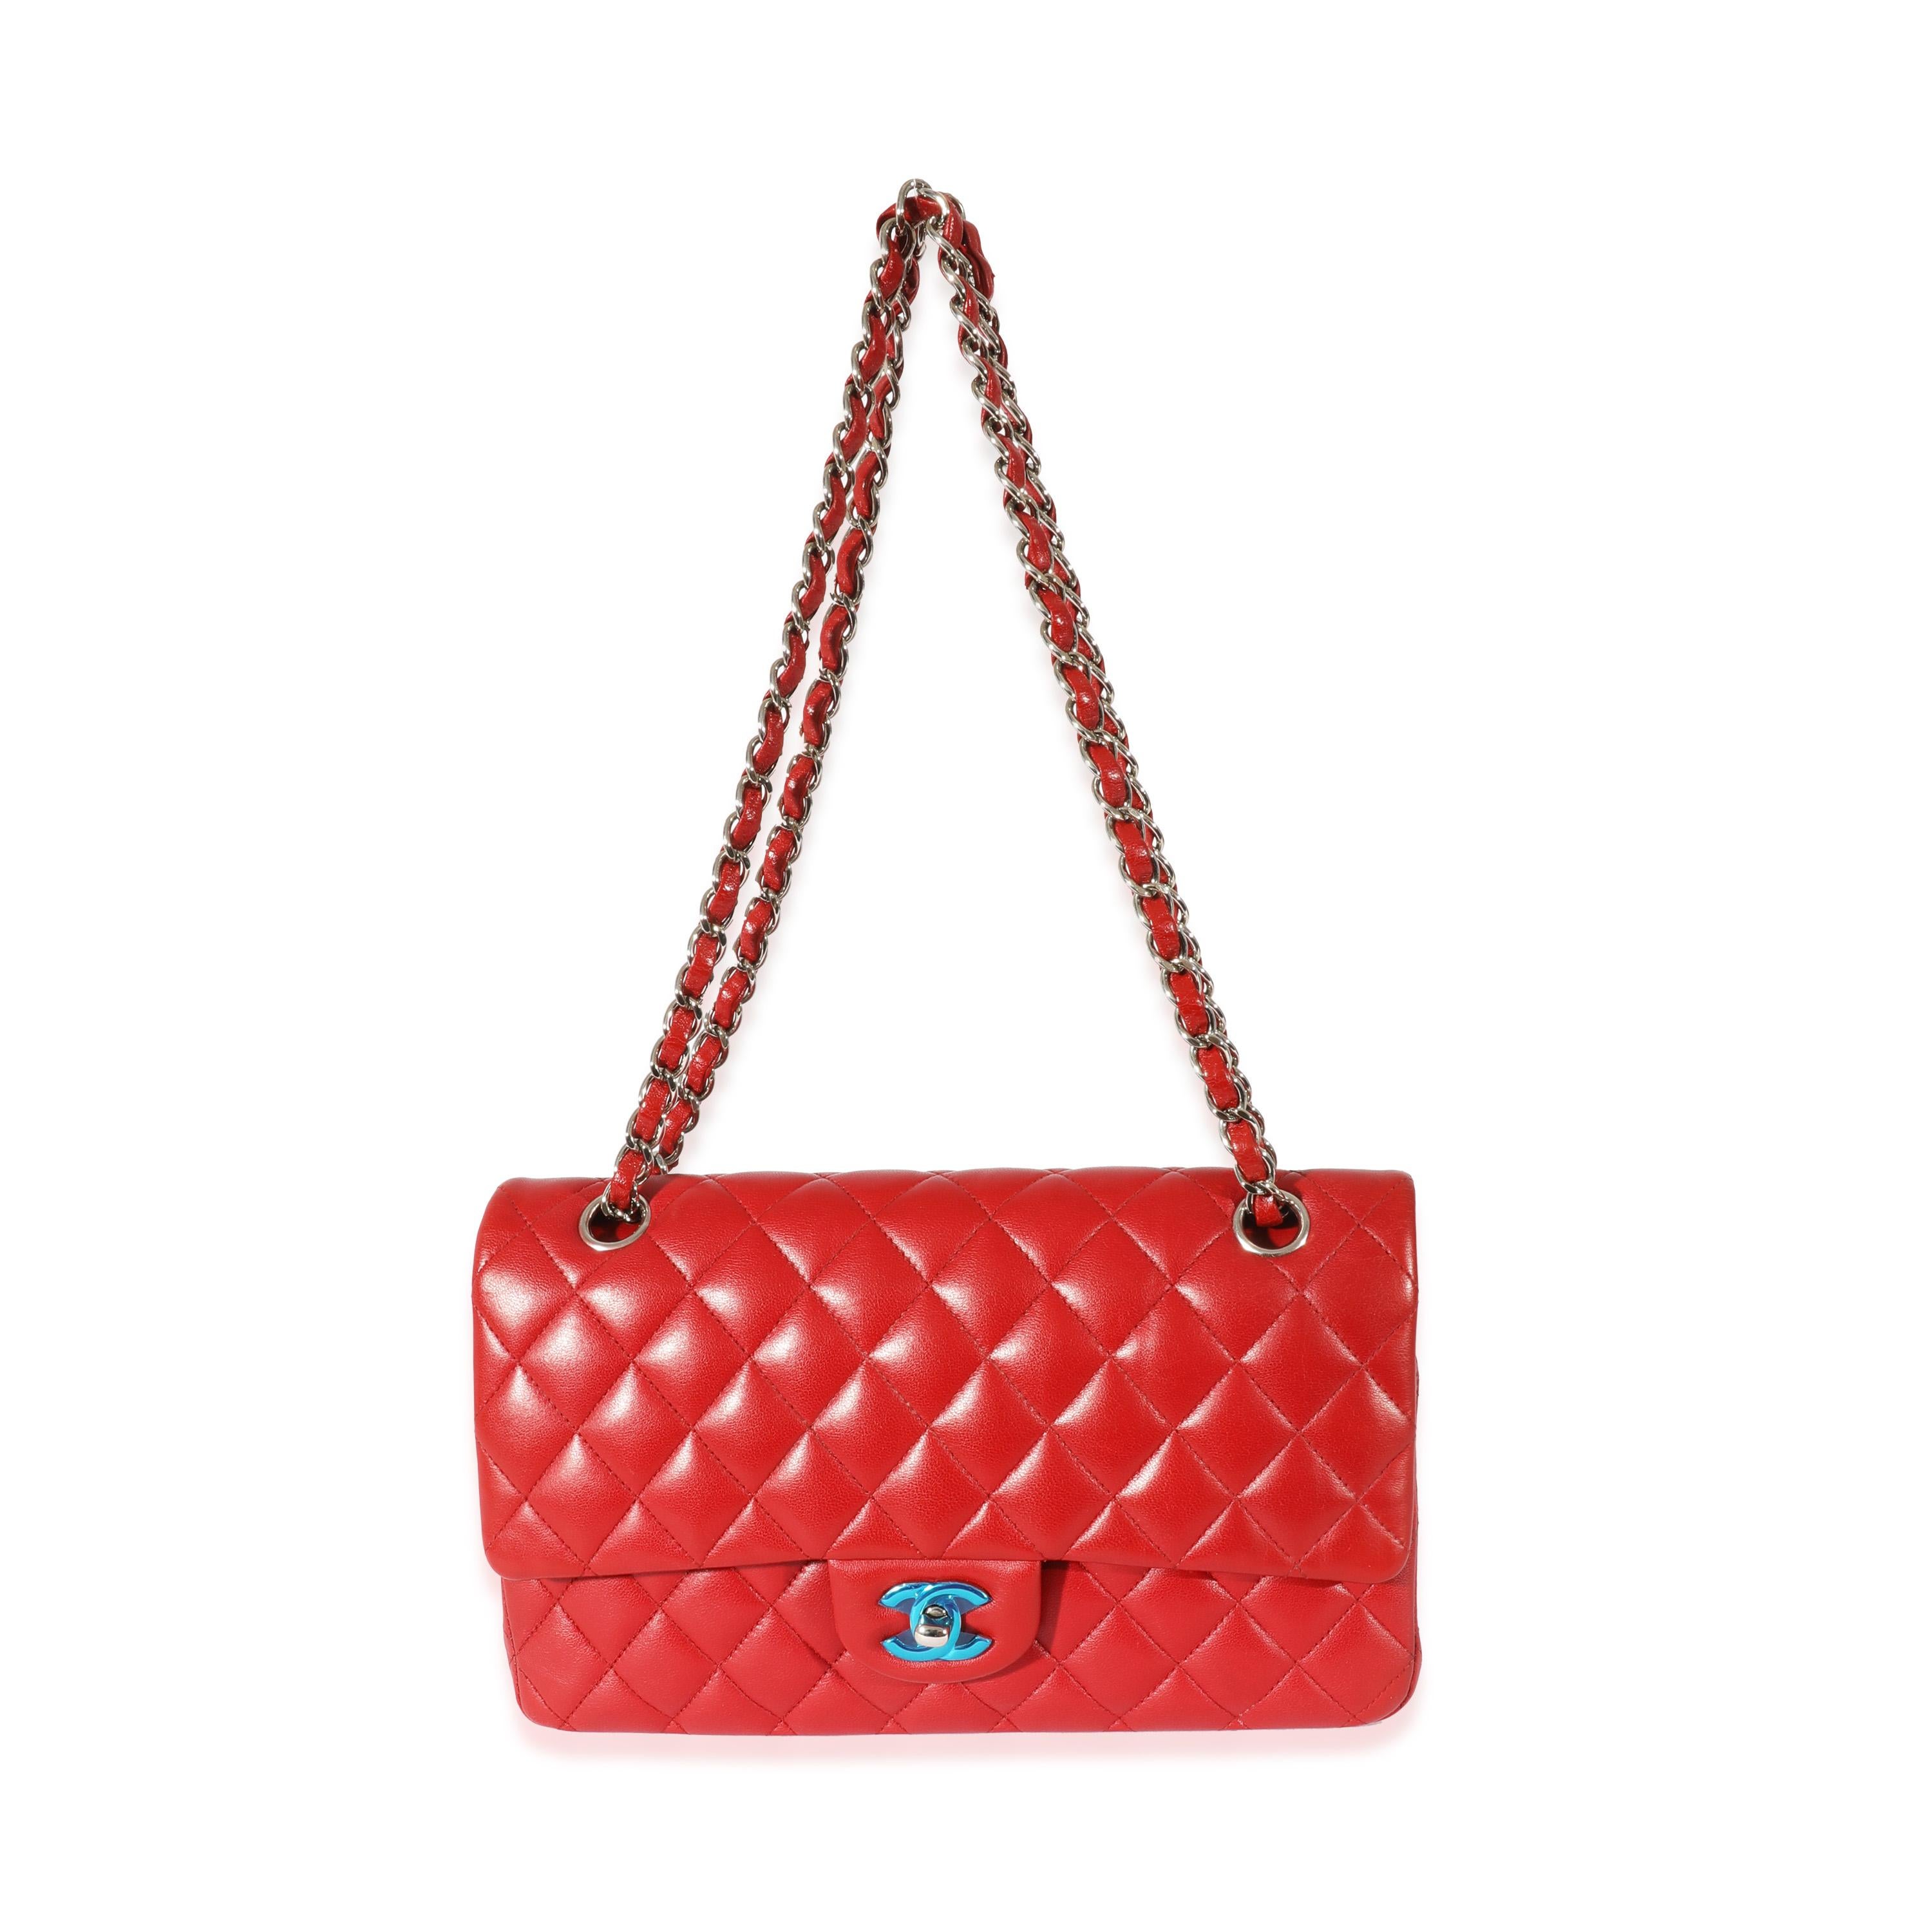 Listing Title: Chanel Red Quilted Lambskin Medium Classic Double Flap Bag
 SKU: 128365
 MSRP: 8800.00
 Condition: Pre-owned 
 Condition Description: A timeless classic that never goes out of style, the flap bag from Chanel dates back to 1955 and has